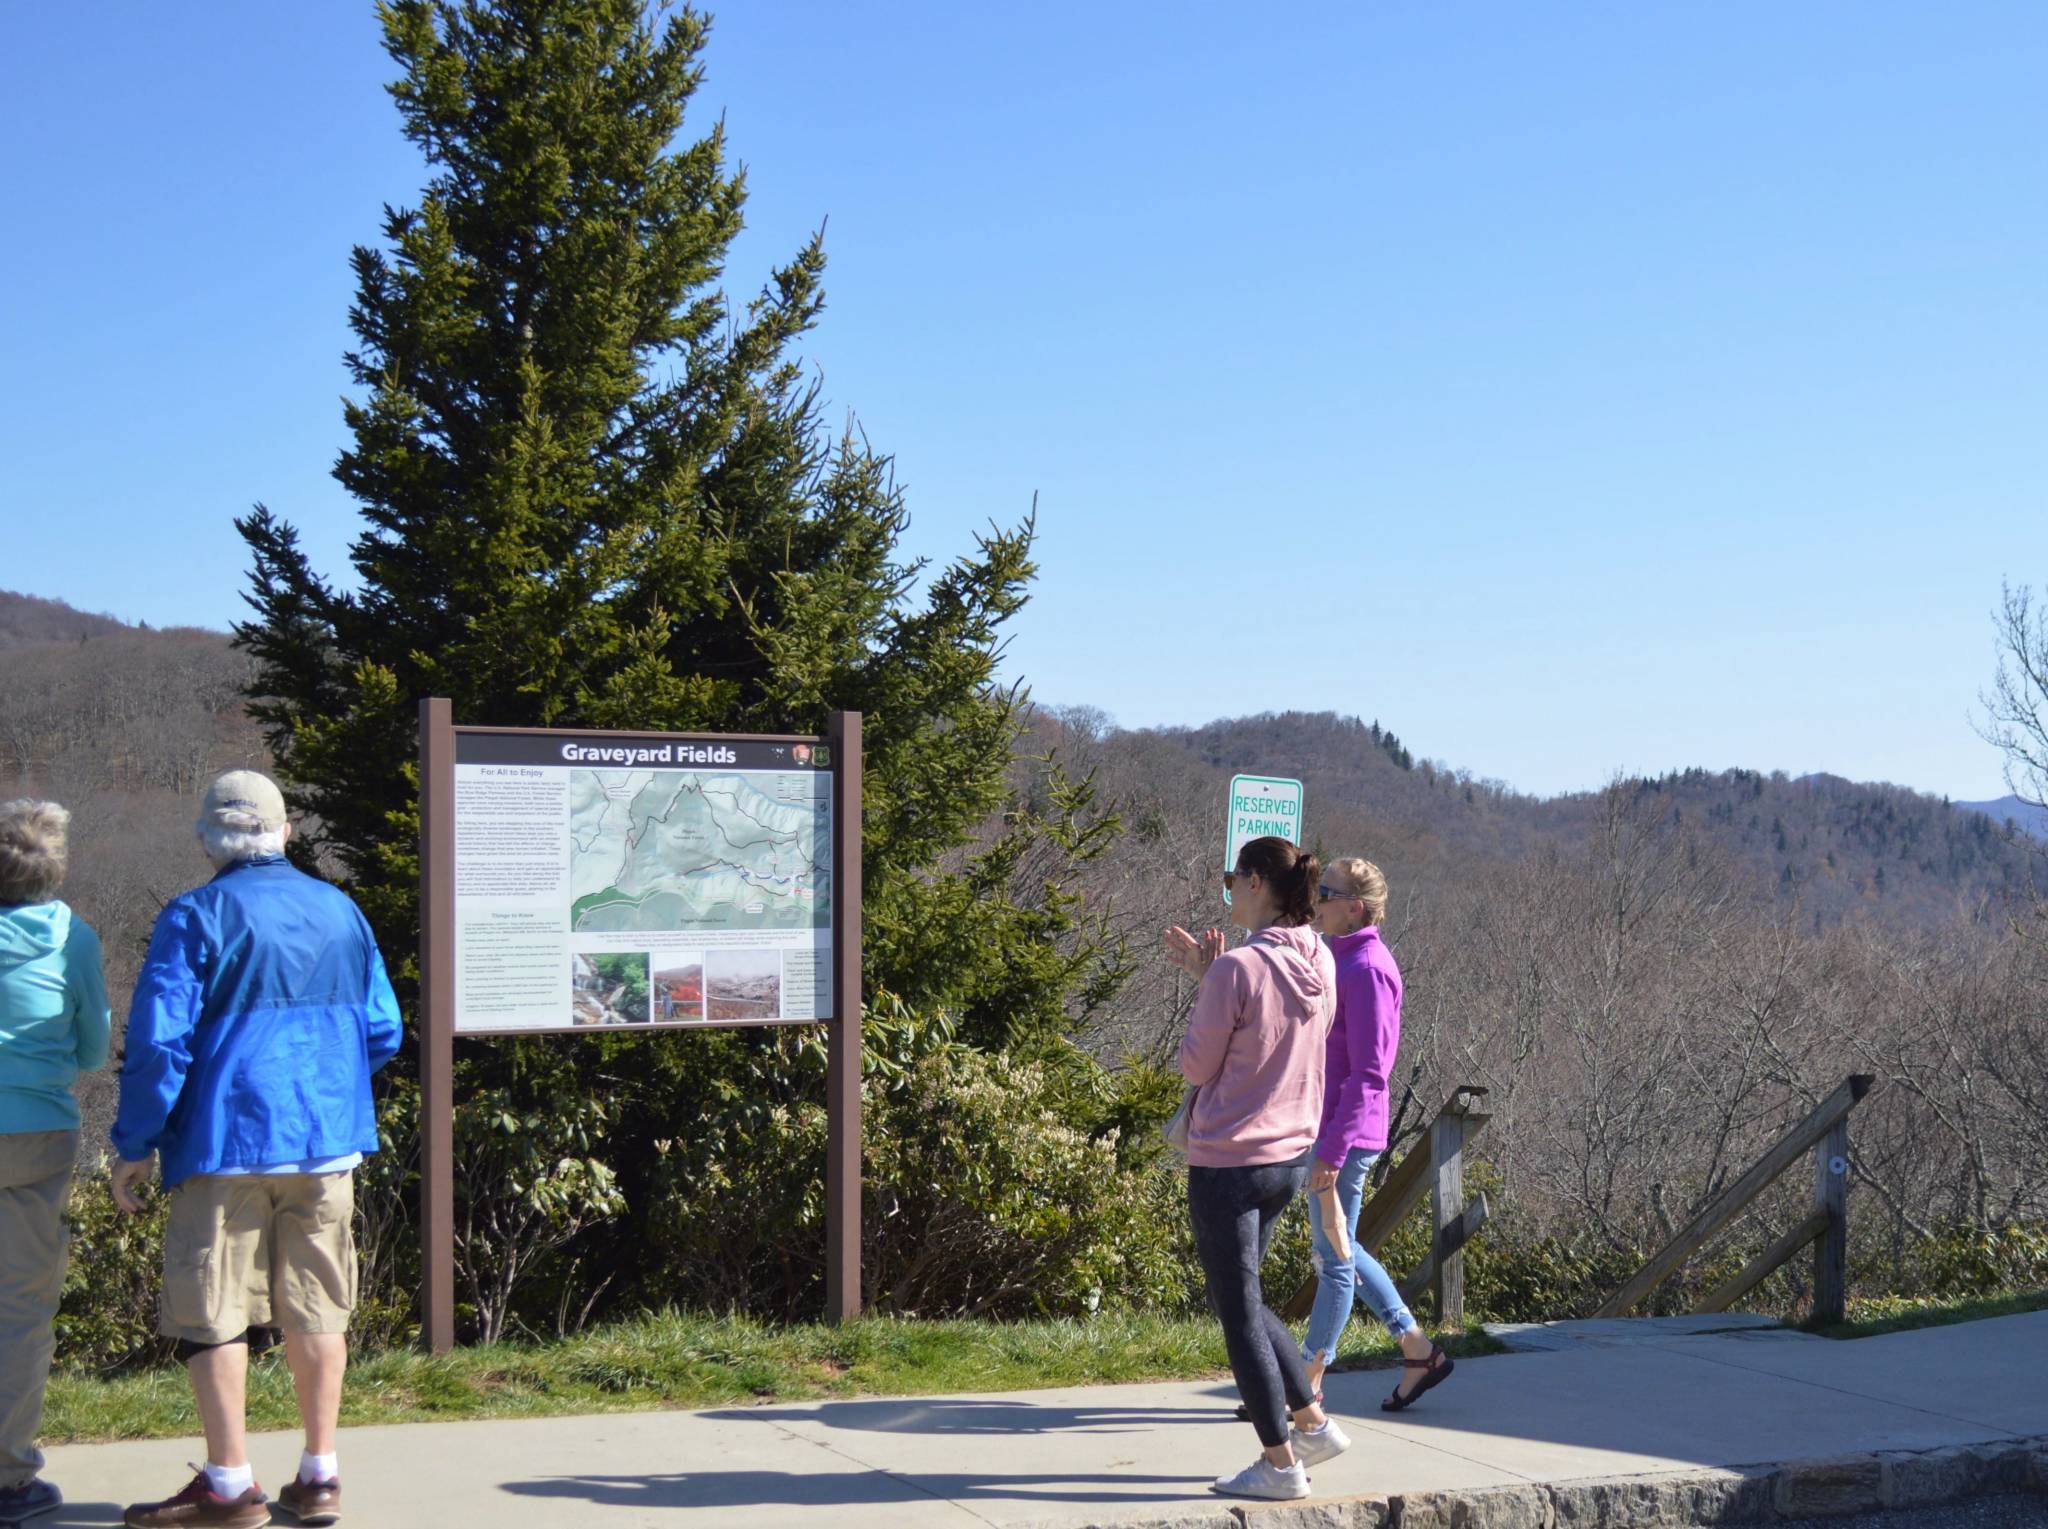 Sign and people at trailhead to graveyard fields trail on blue ridge parkway